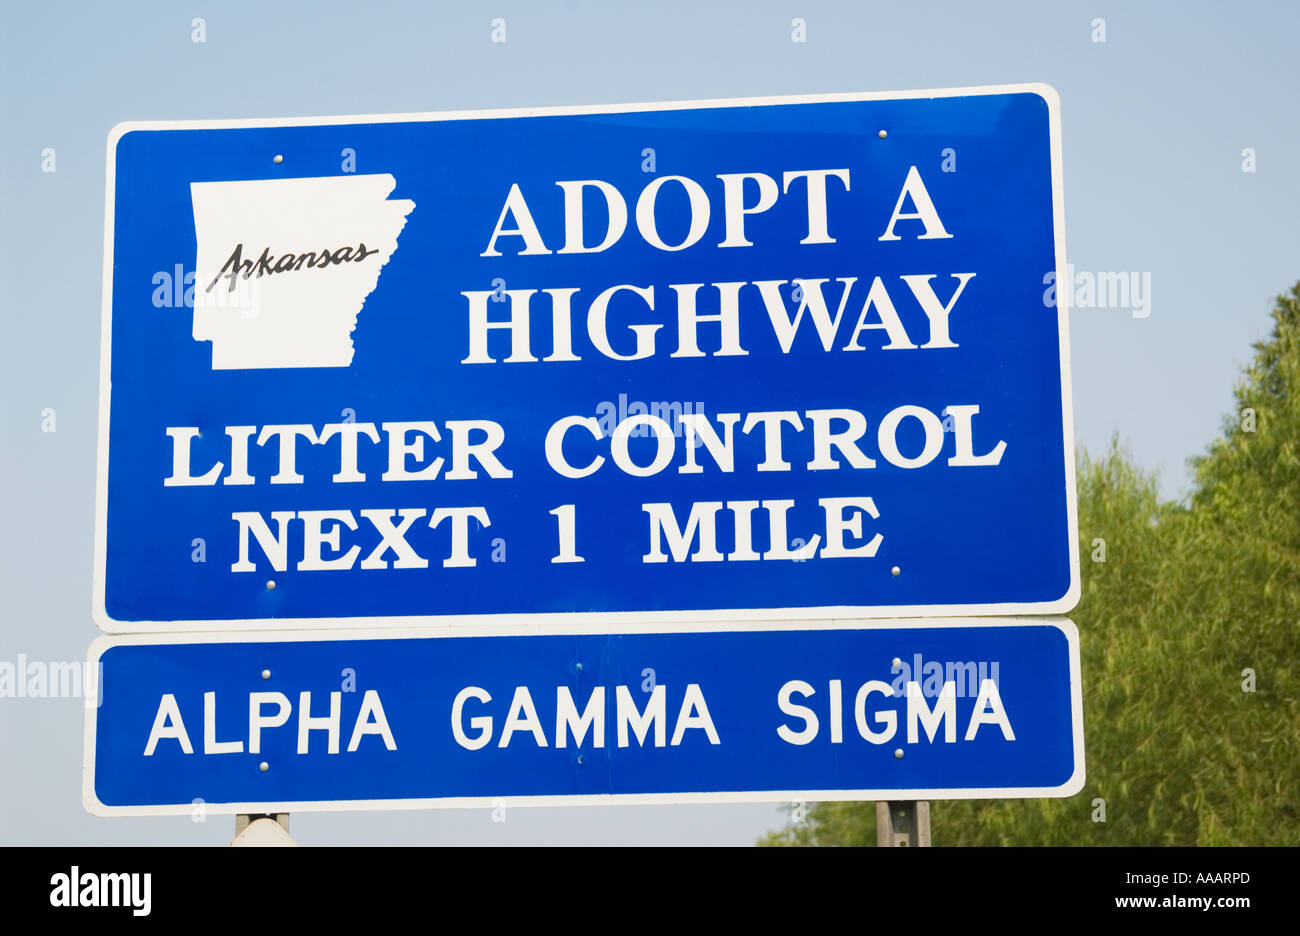 Arkansas Adopt a Highway Sign for Litter Control USA Stock Photo